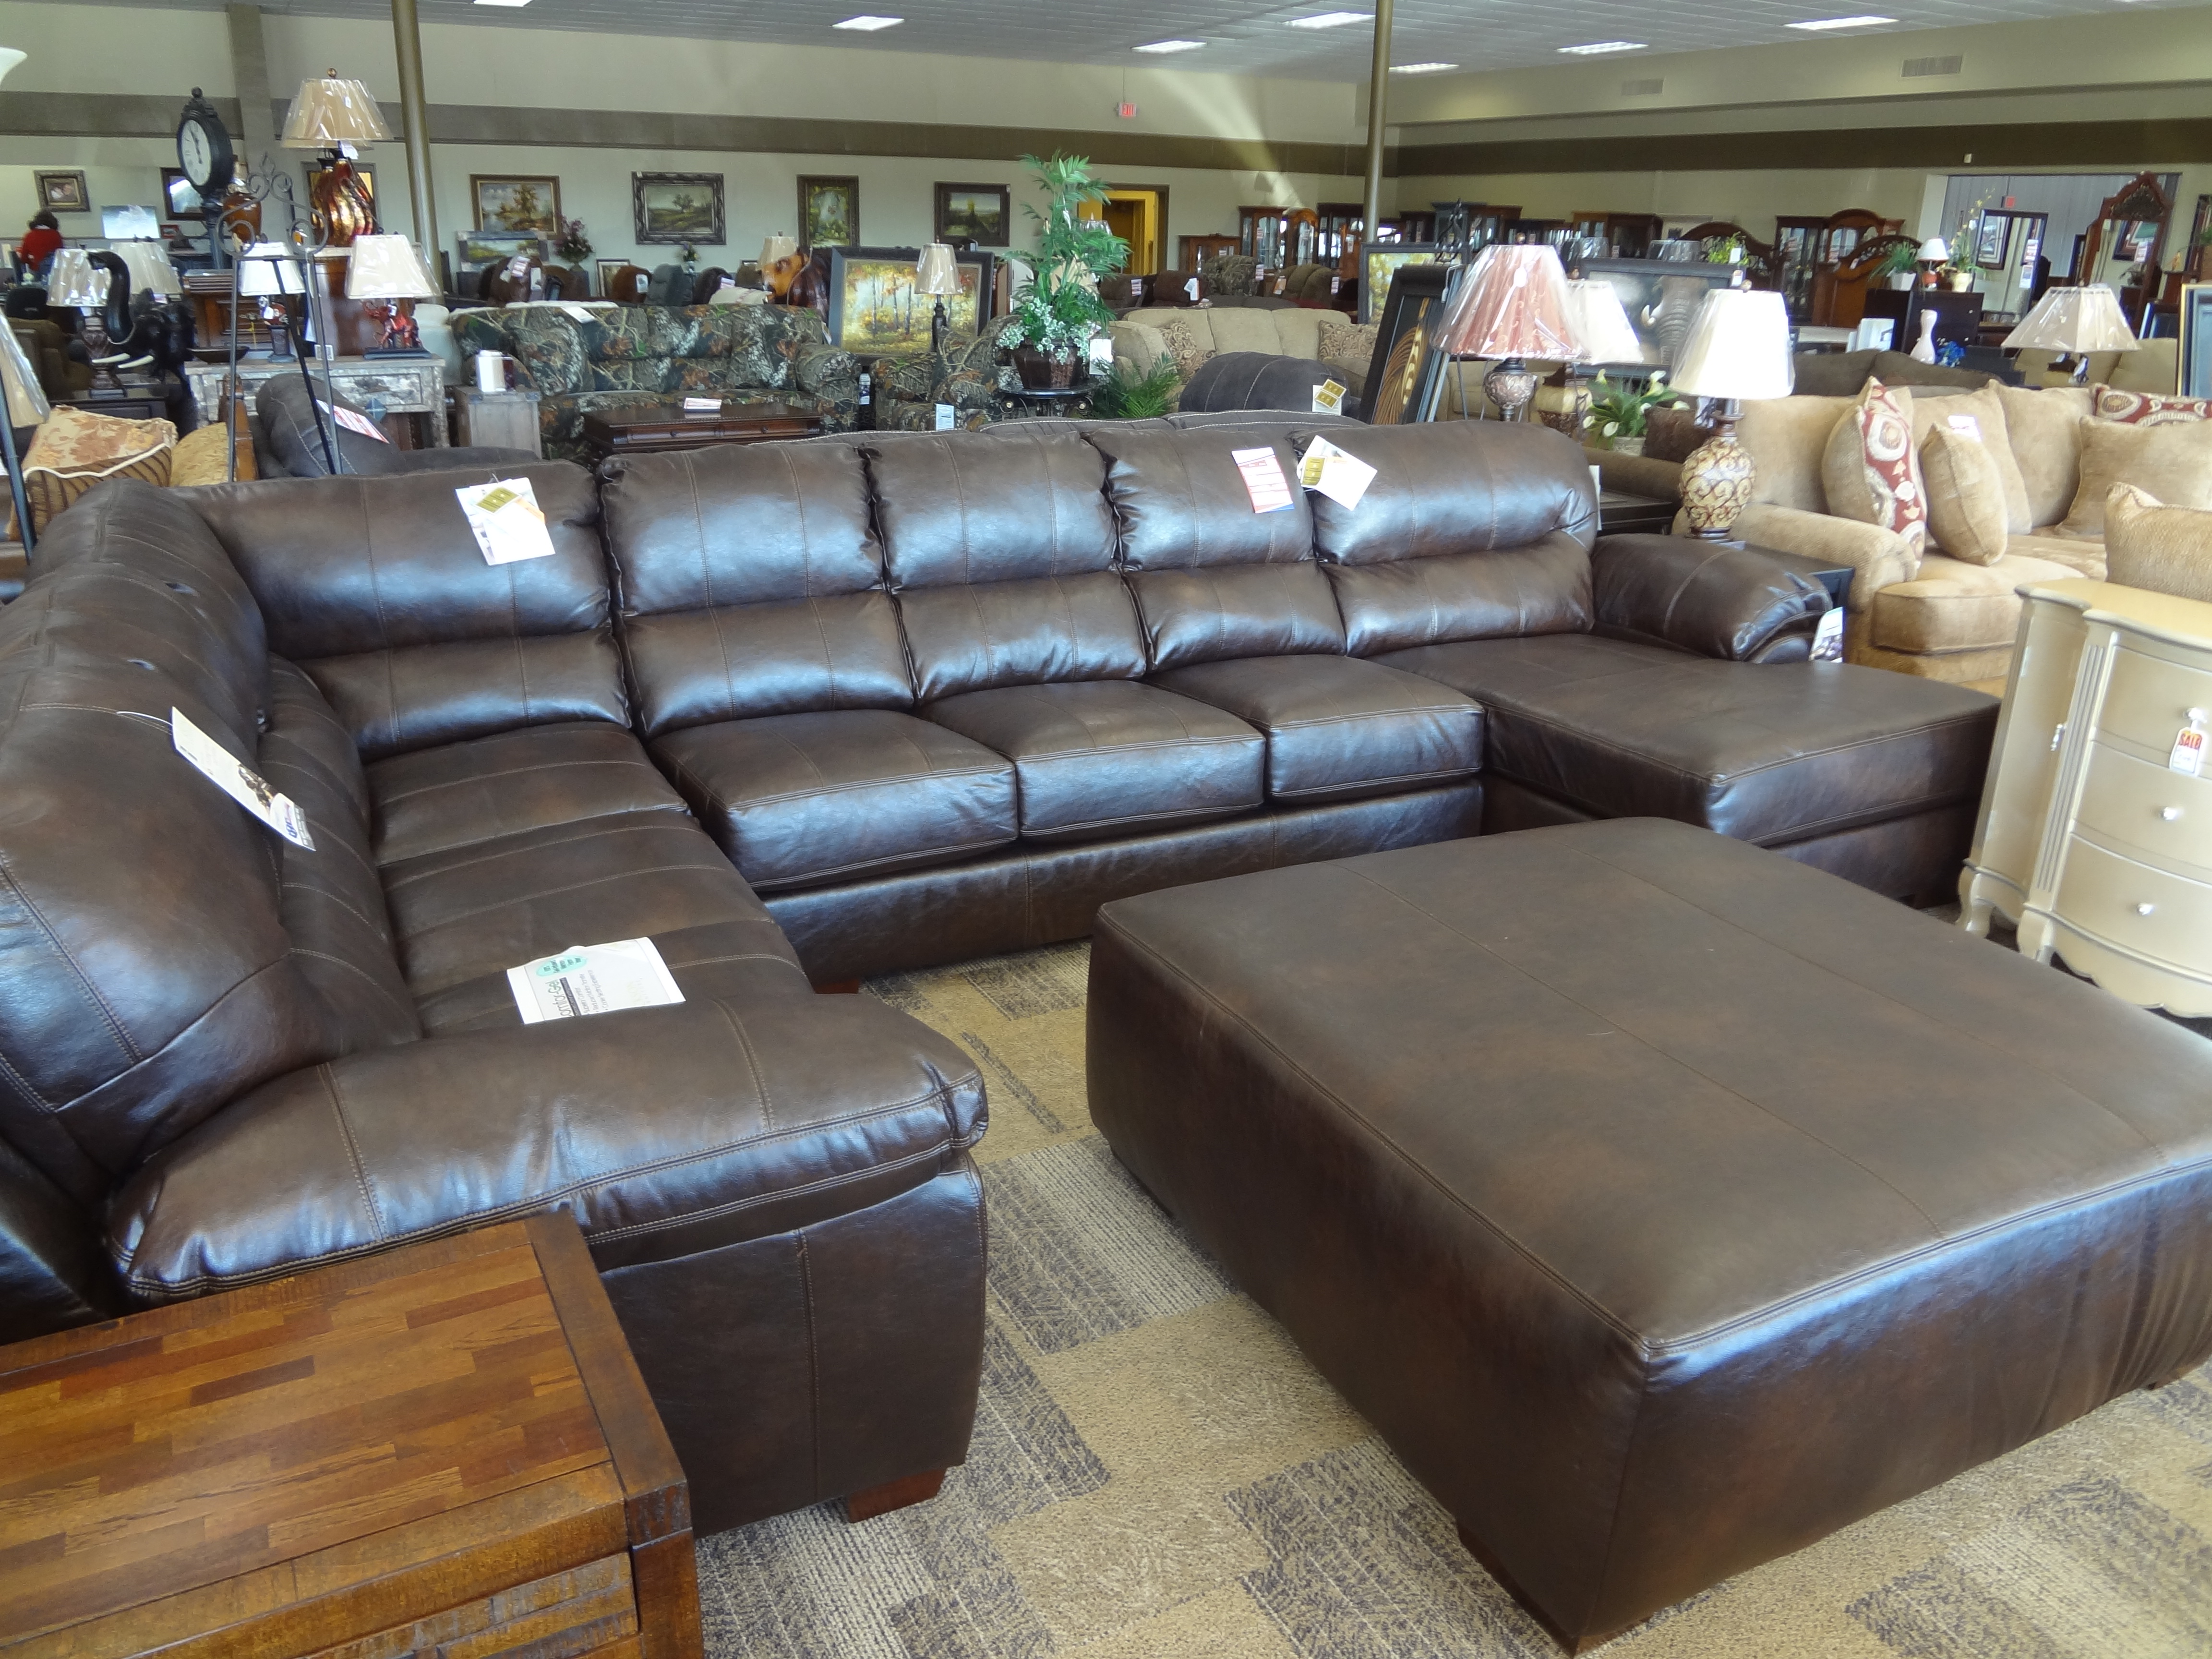 Yourway Furniture Tuscaloosa Al Hours Furniture Image Review At